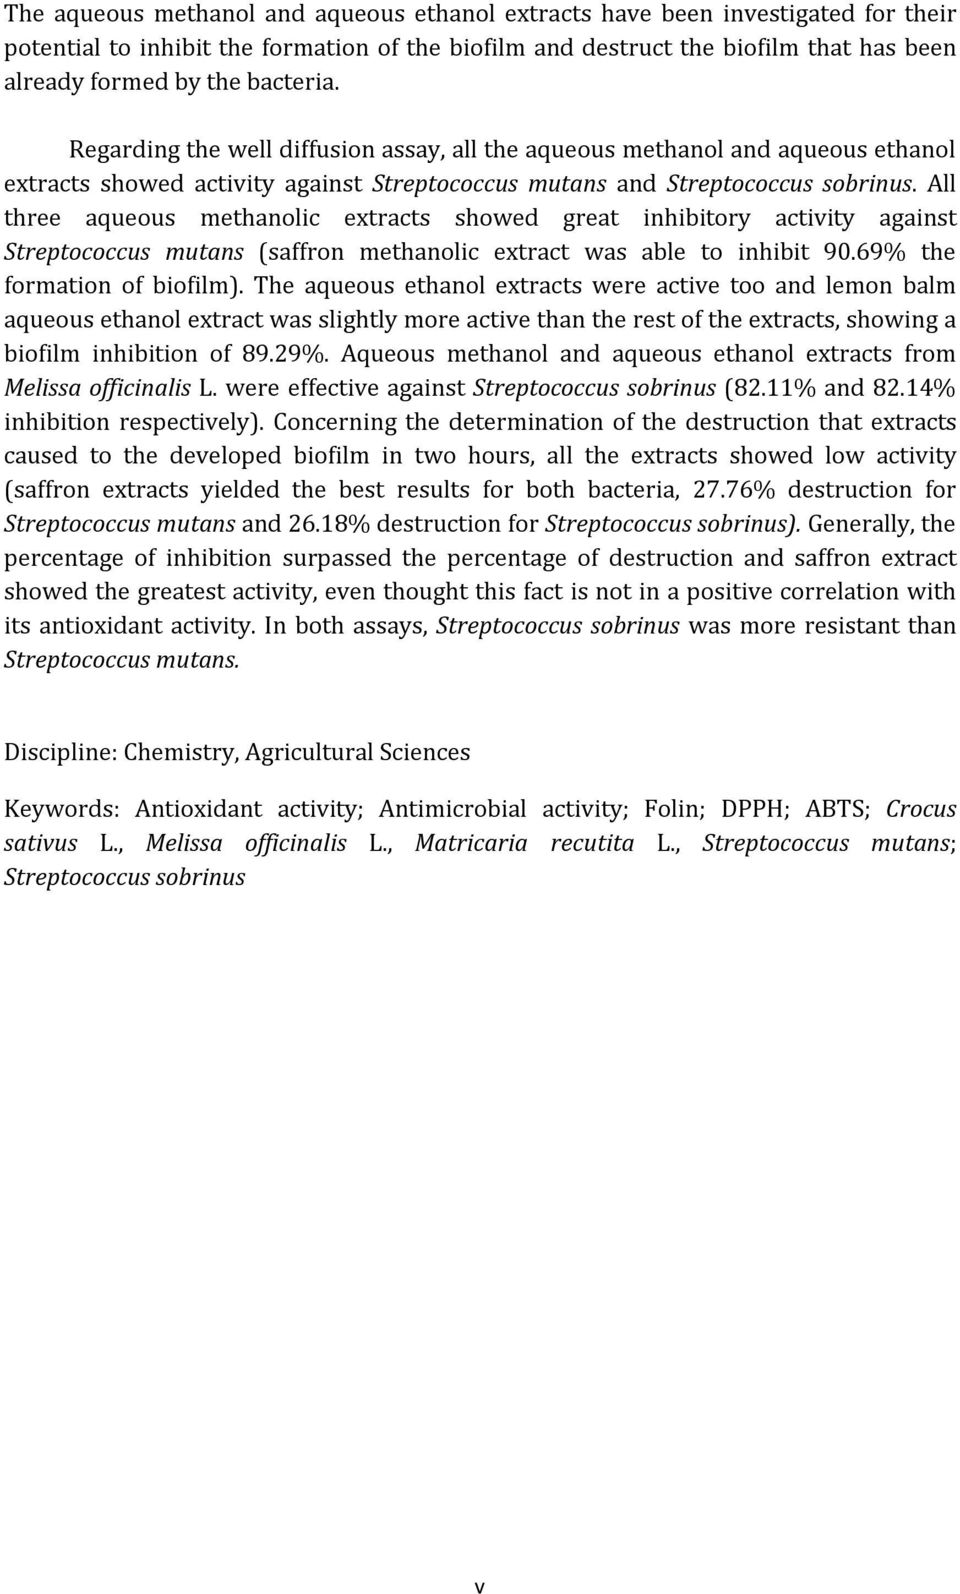 All three aqueous methanolic extracts showed great inhibitory activity against Streptococcus mutans (saffron methanolic extract was able to inhibit 90.69% the formation of biofilm).